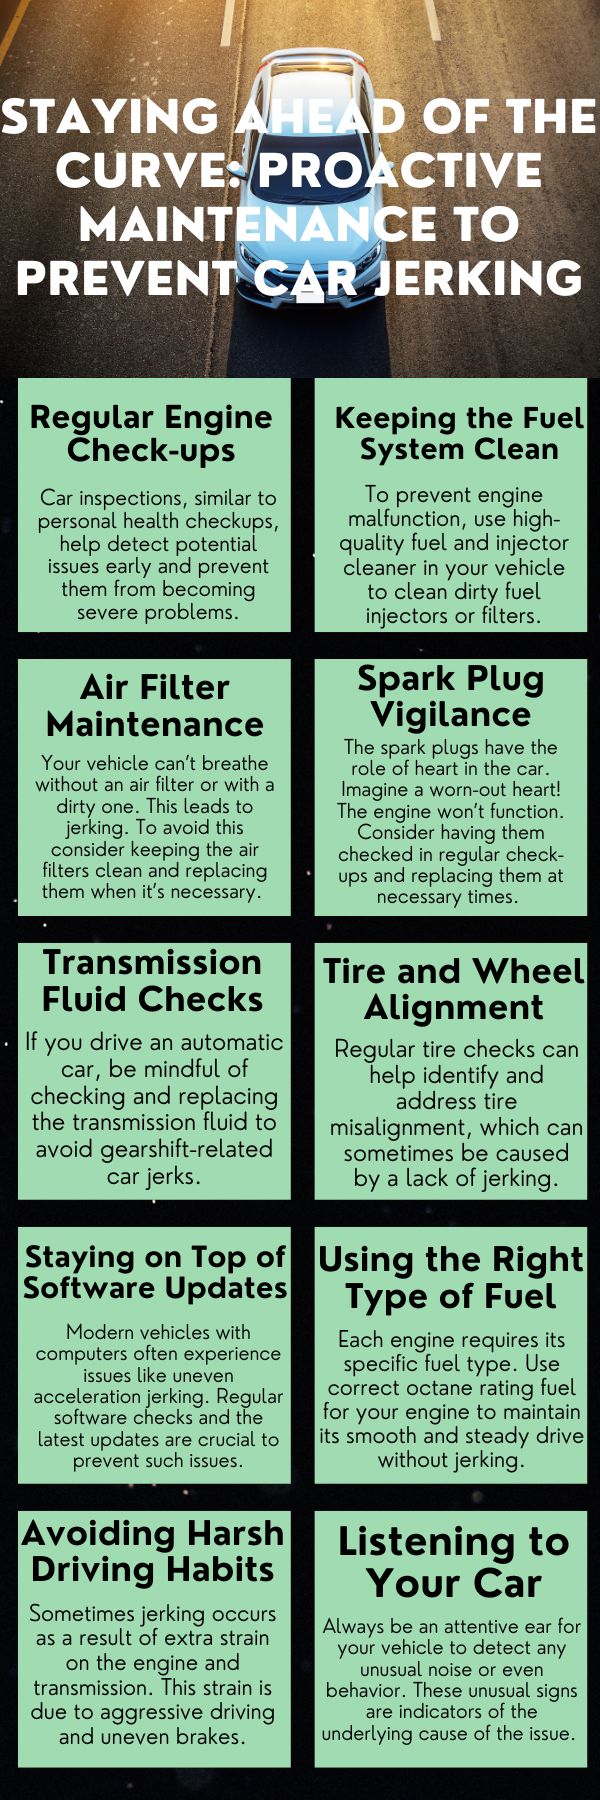 an infographic about Staying Ahead of the Curve: Proactive Maintenance to Prevent Car Jerking